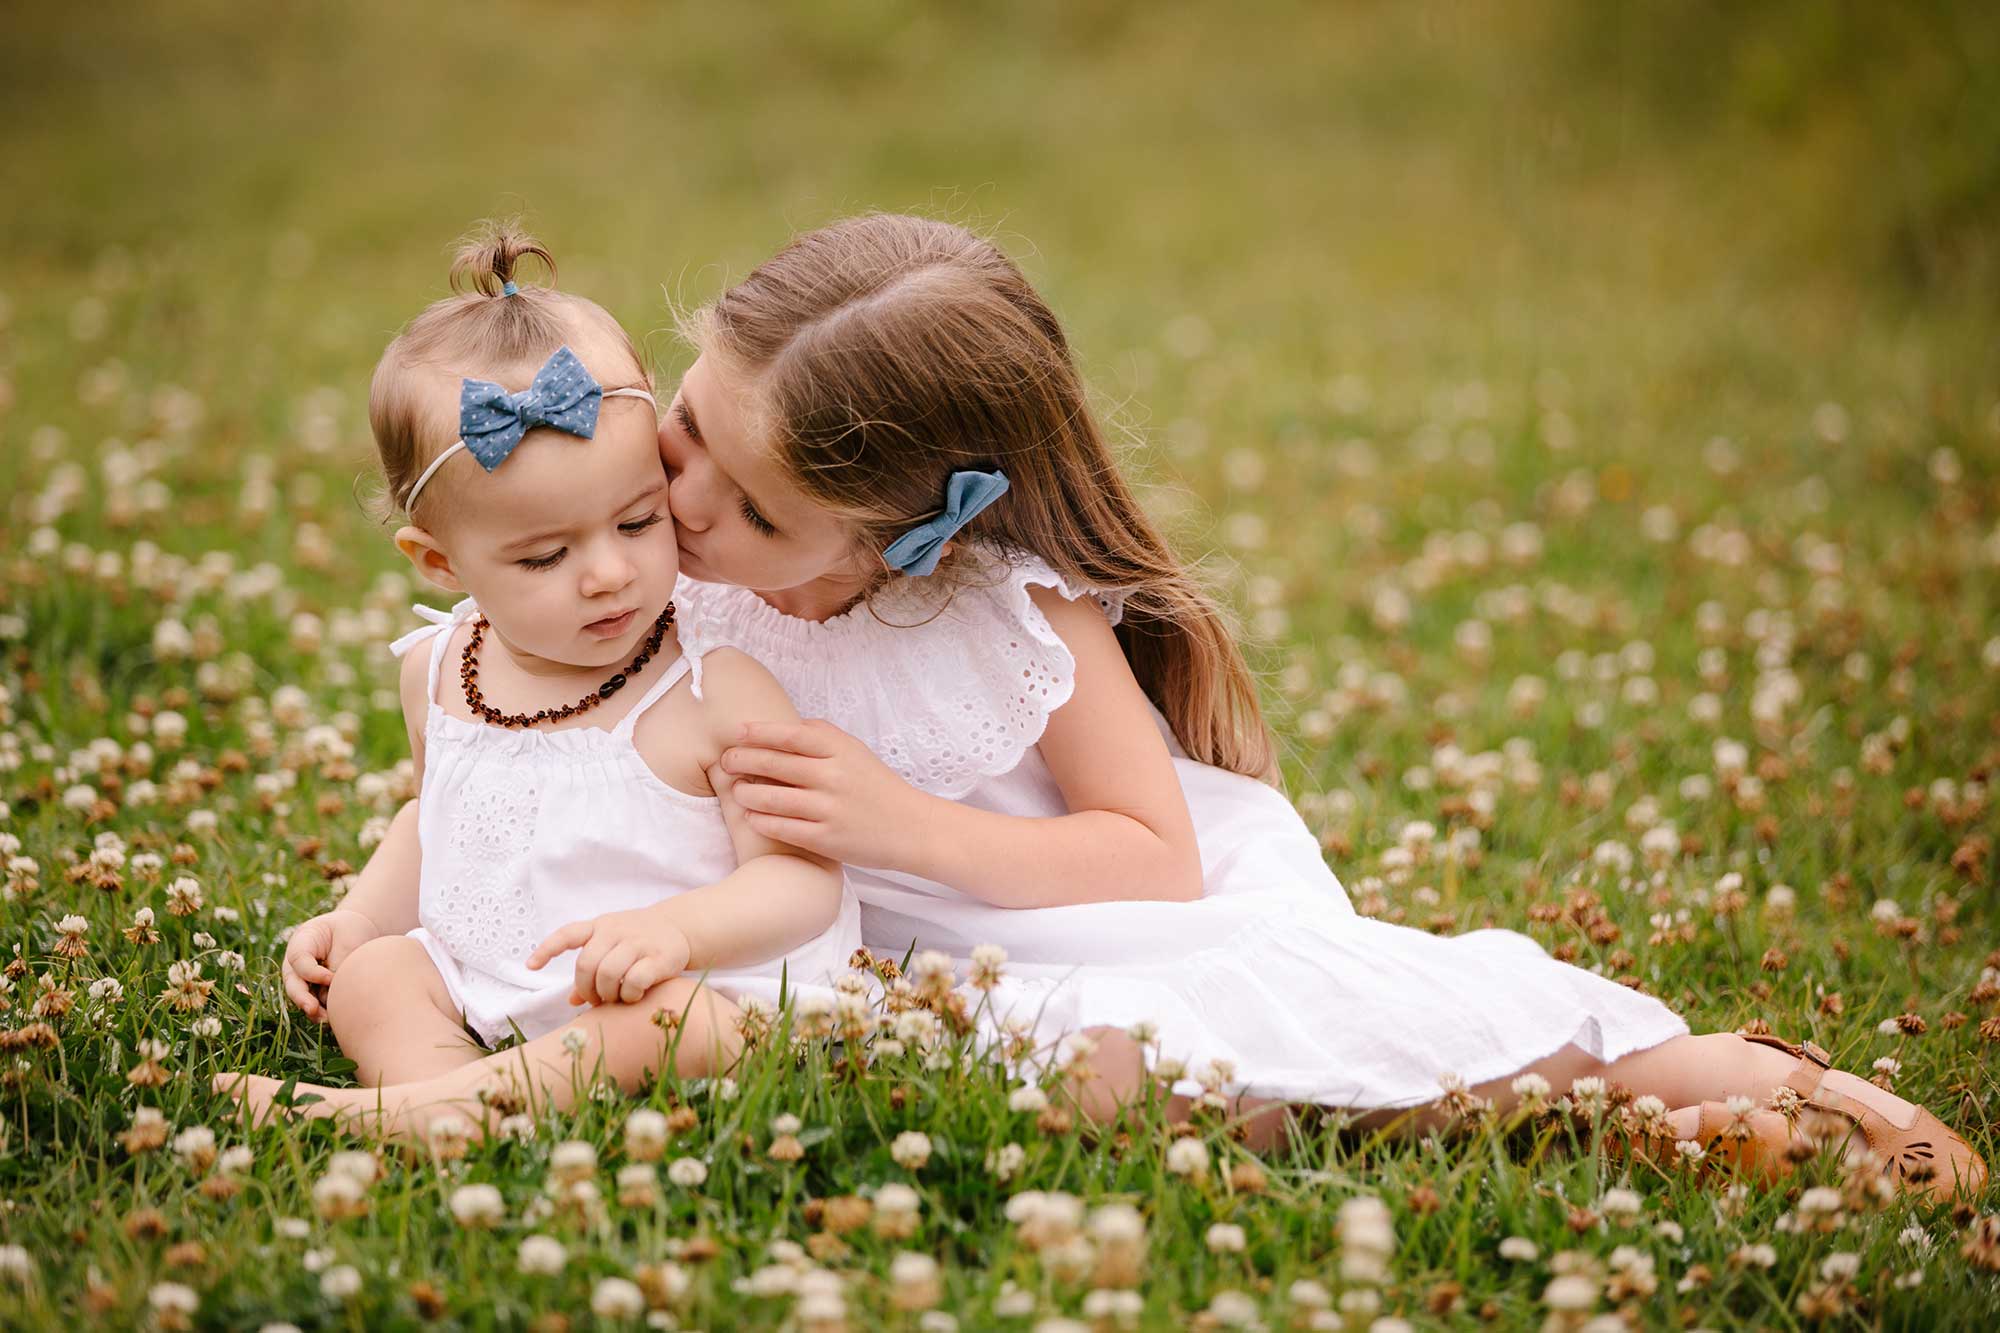 image of two small sisters together in a meadow